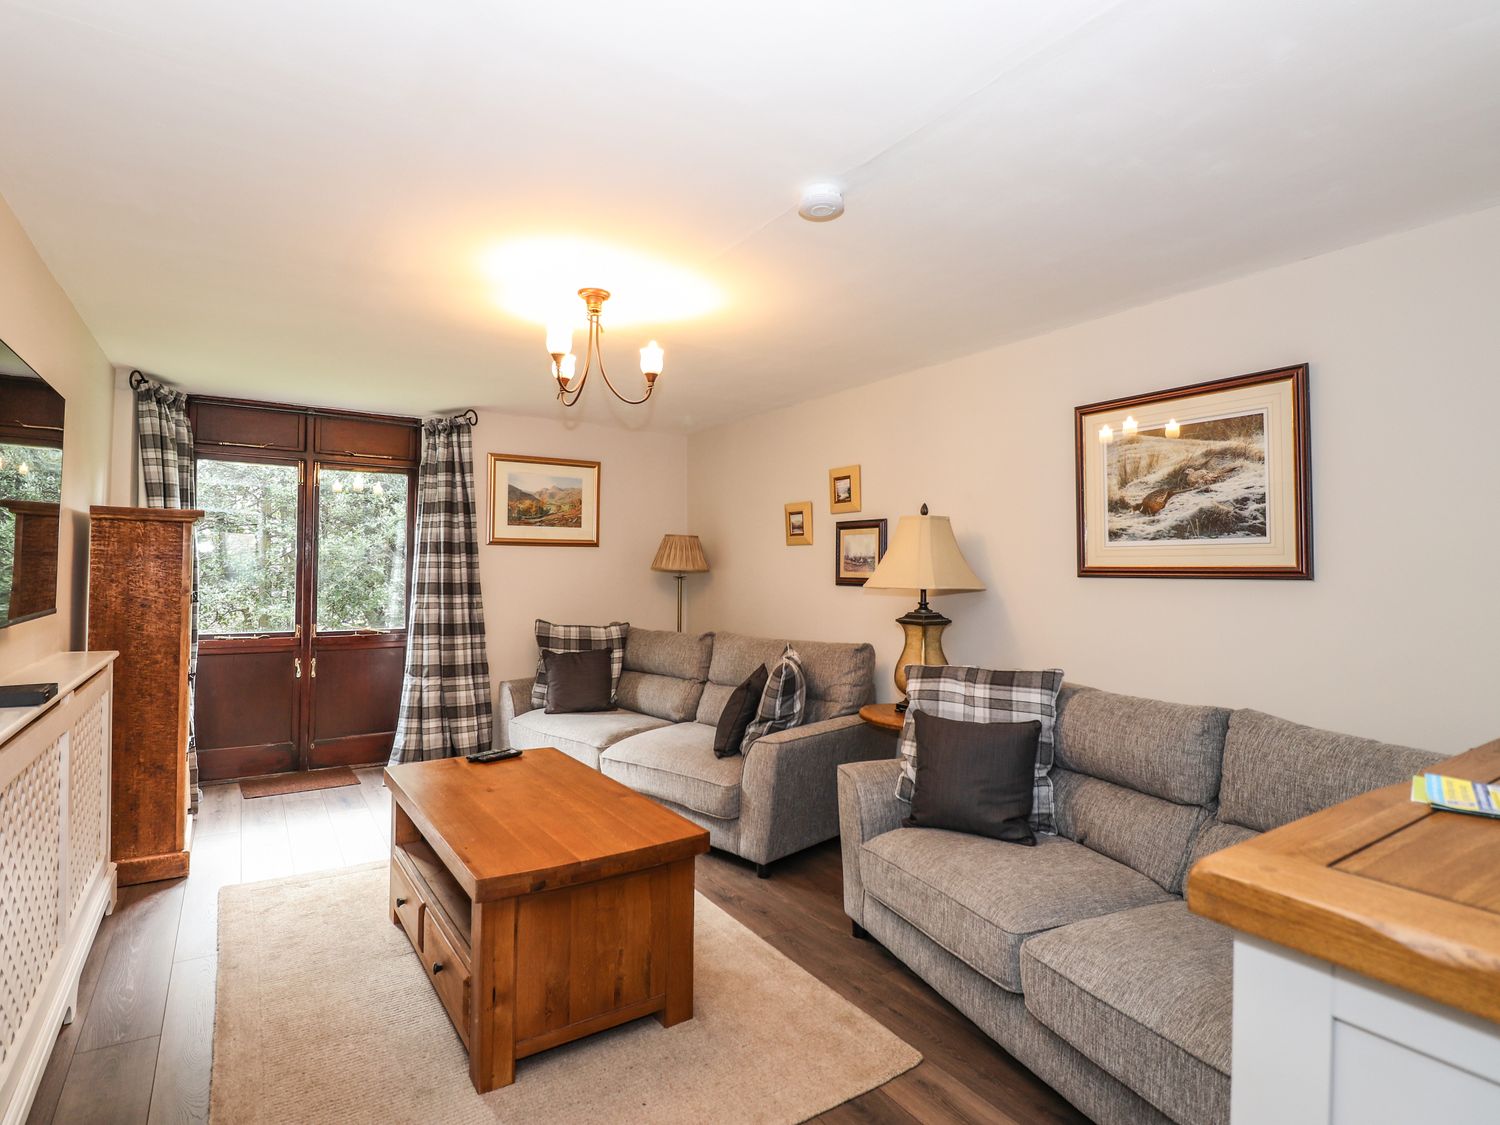 Candleberry Cottage - Lake District - 1042030 - photo 1